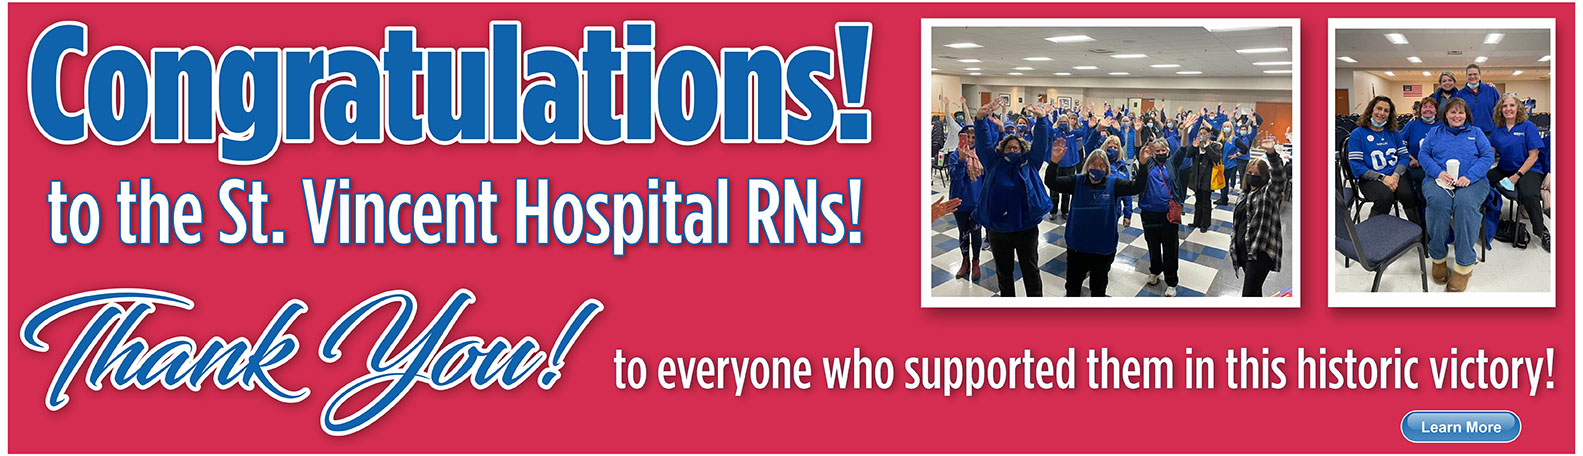 Congratulations to the St. Vincent Hospital RNs!